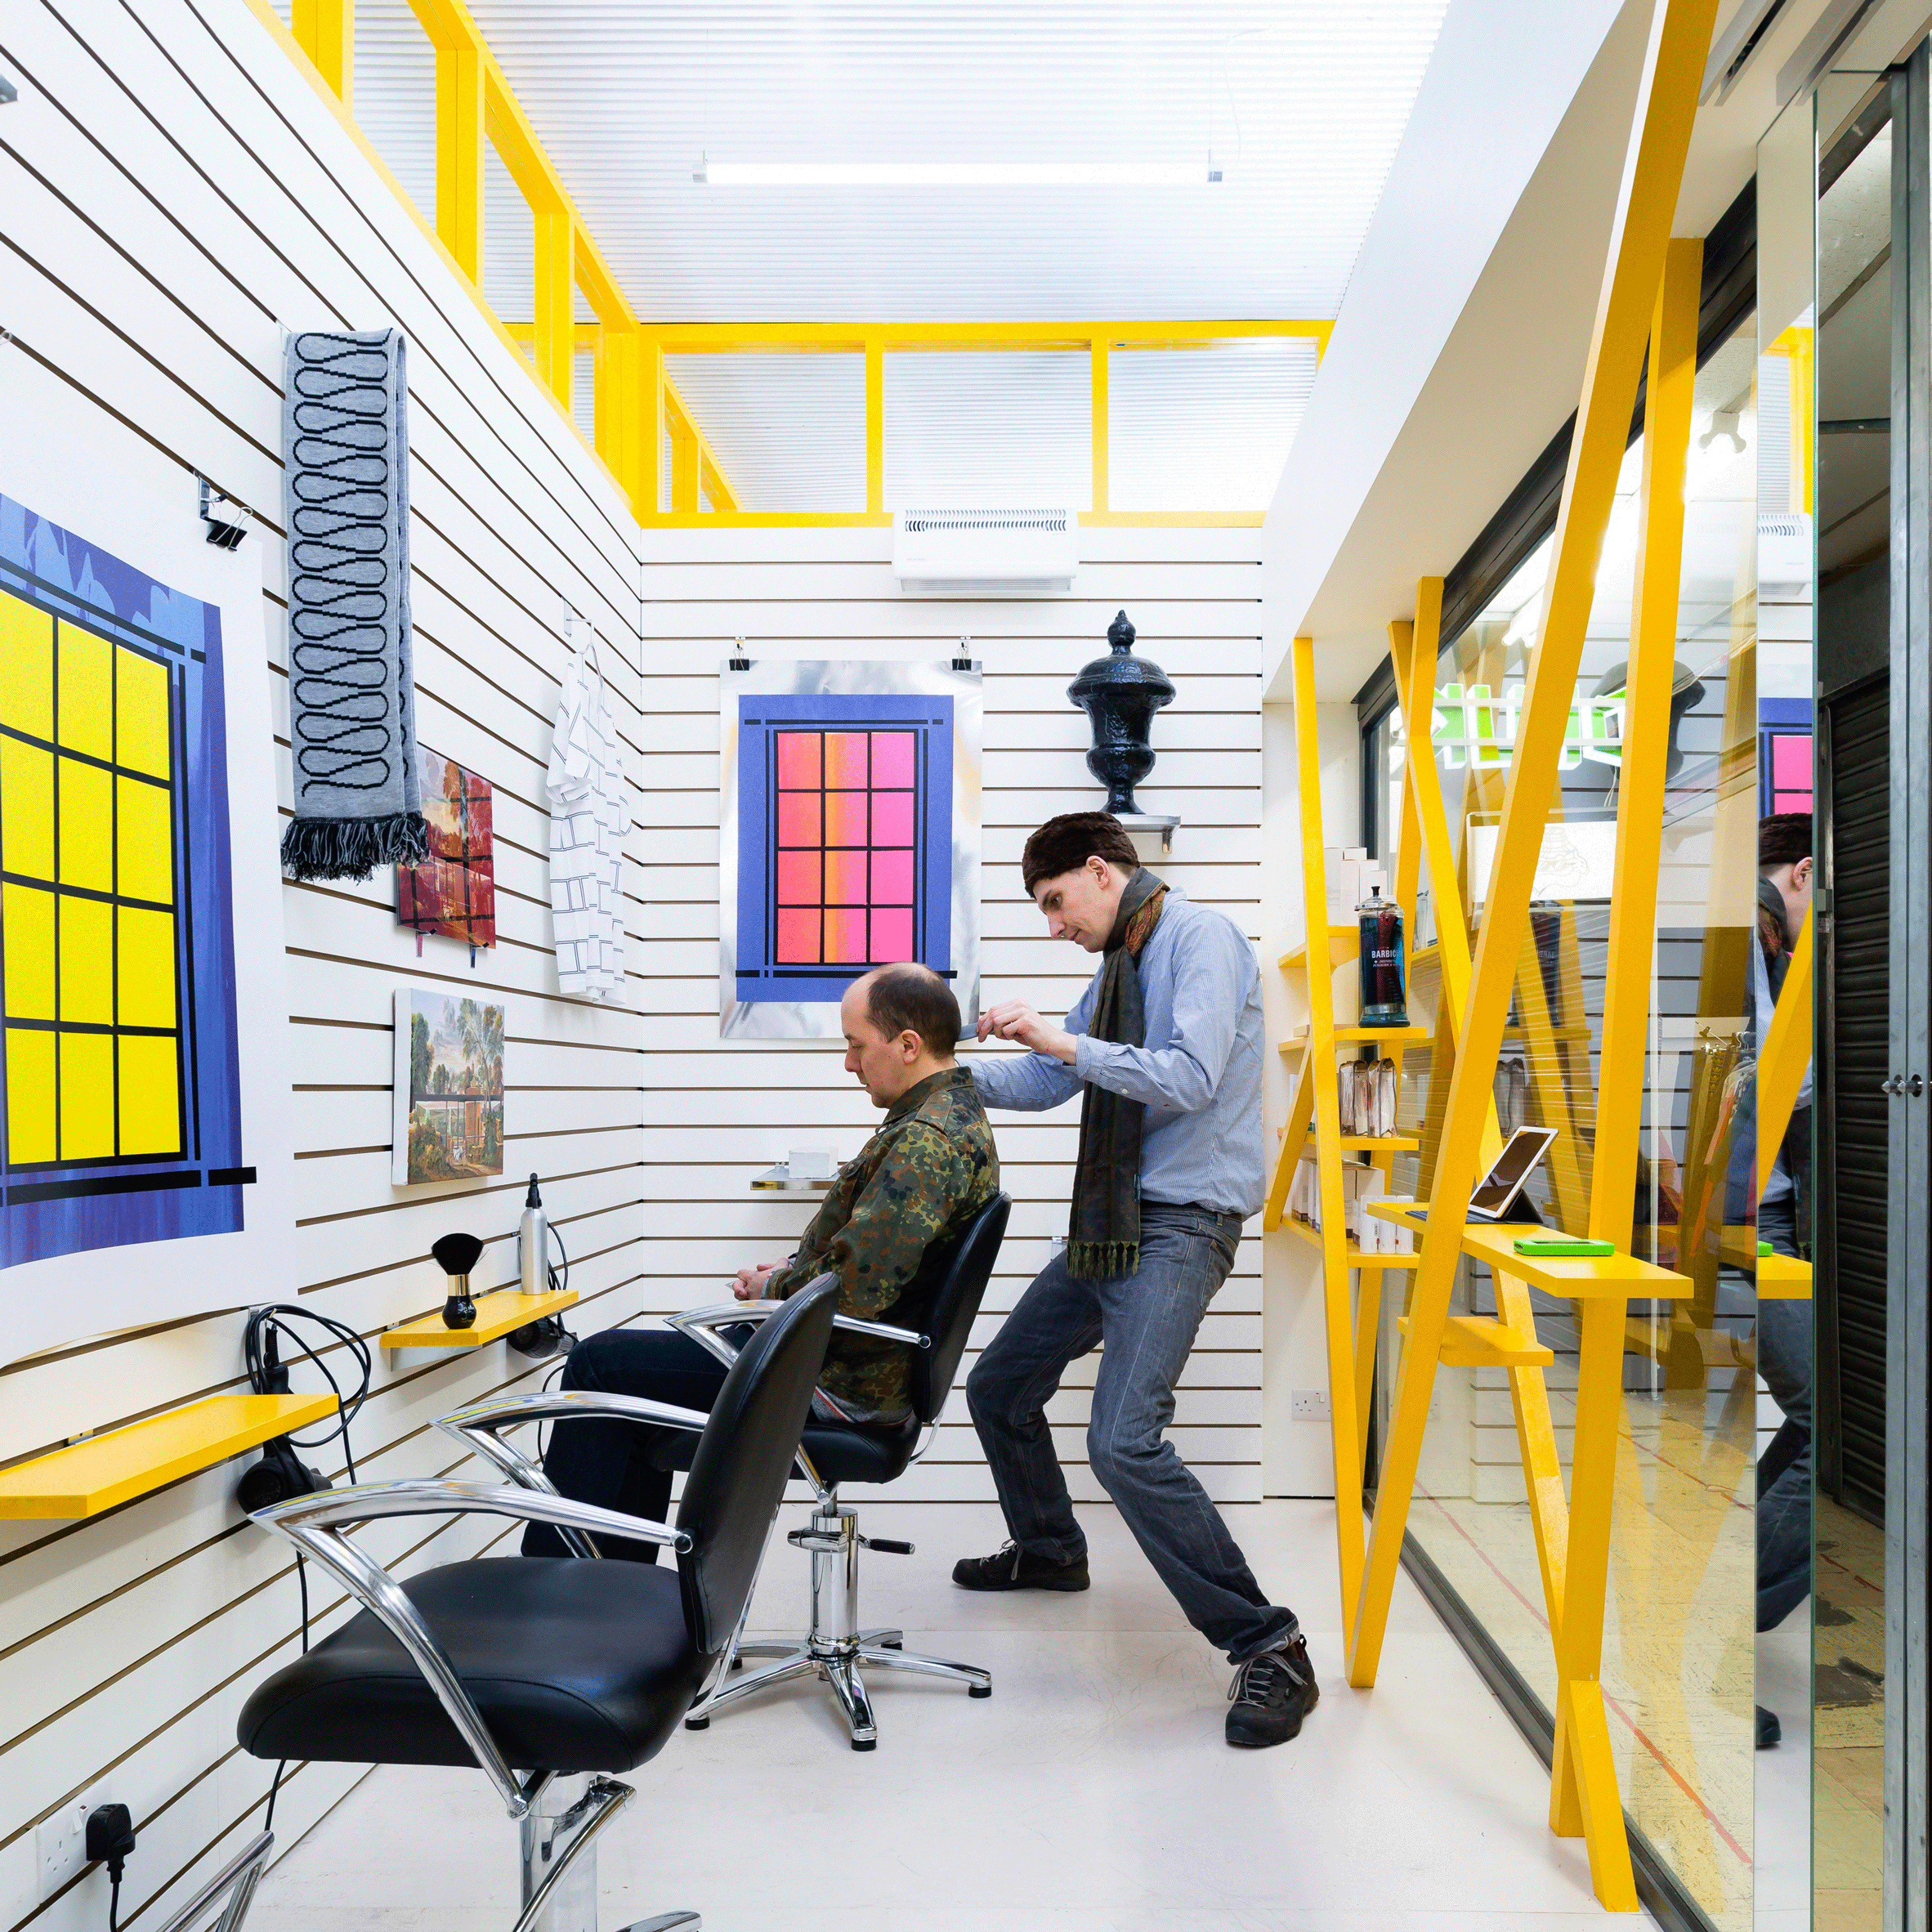 Sam Jacob designs Peckham hair salon and gallery where clients look at  artwork